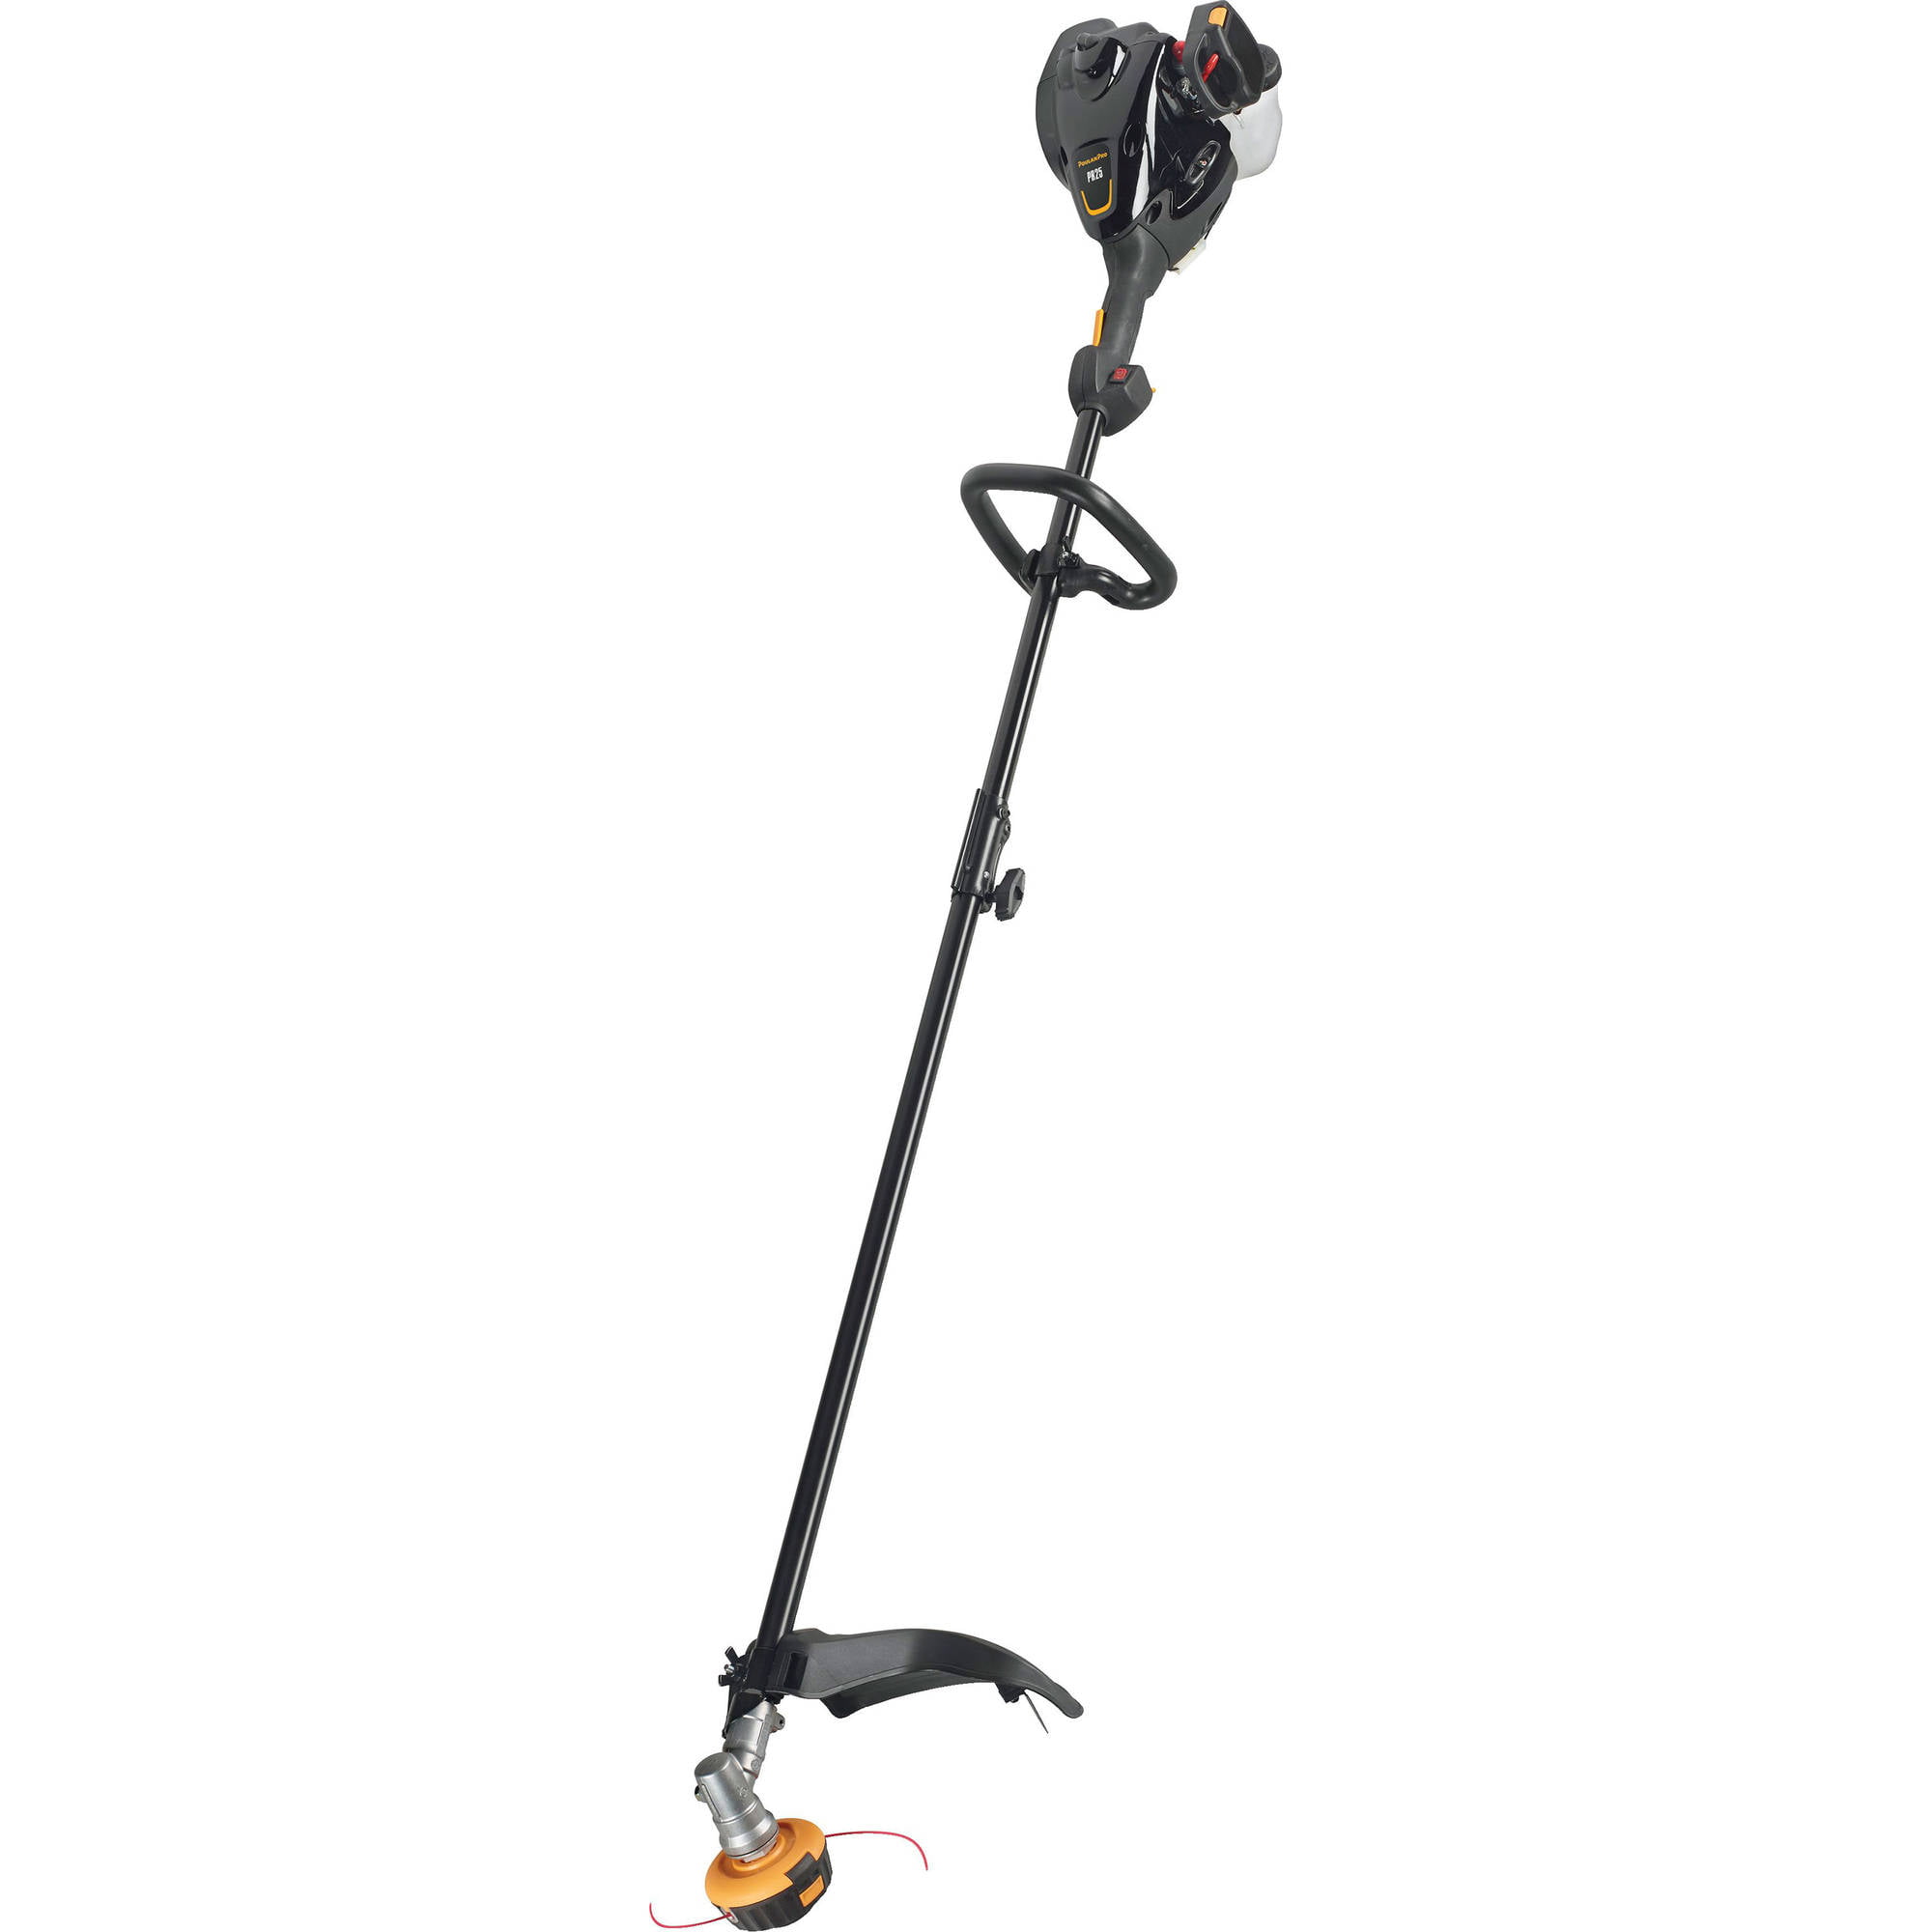 PRORUN 60V 17 in. Brushless Cordless Straight Shaft String Trimmer with 2.5 Ah Battery and Charger